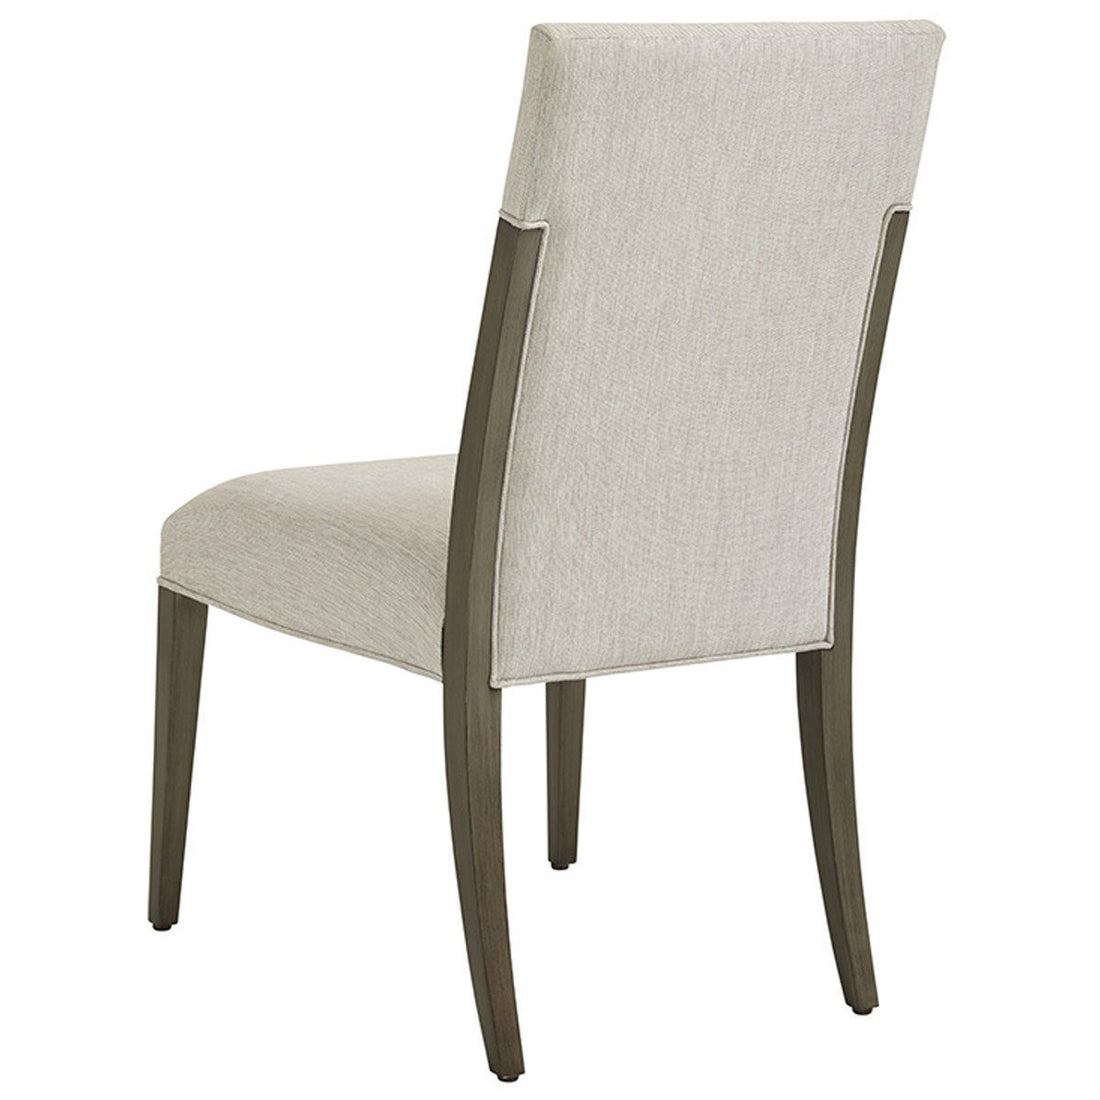 Lexington Ariana Saverne Upholstered Side Chair